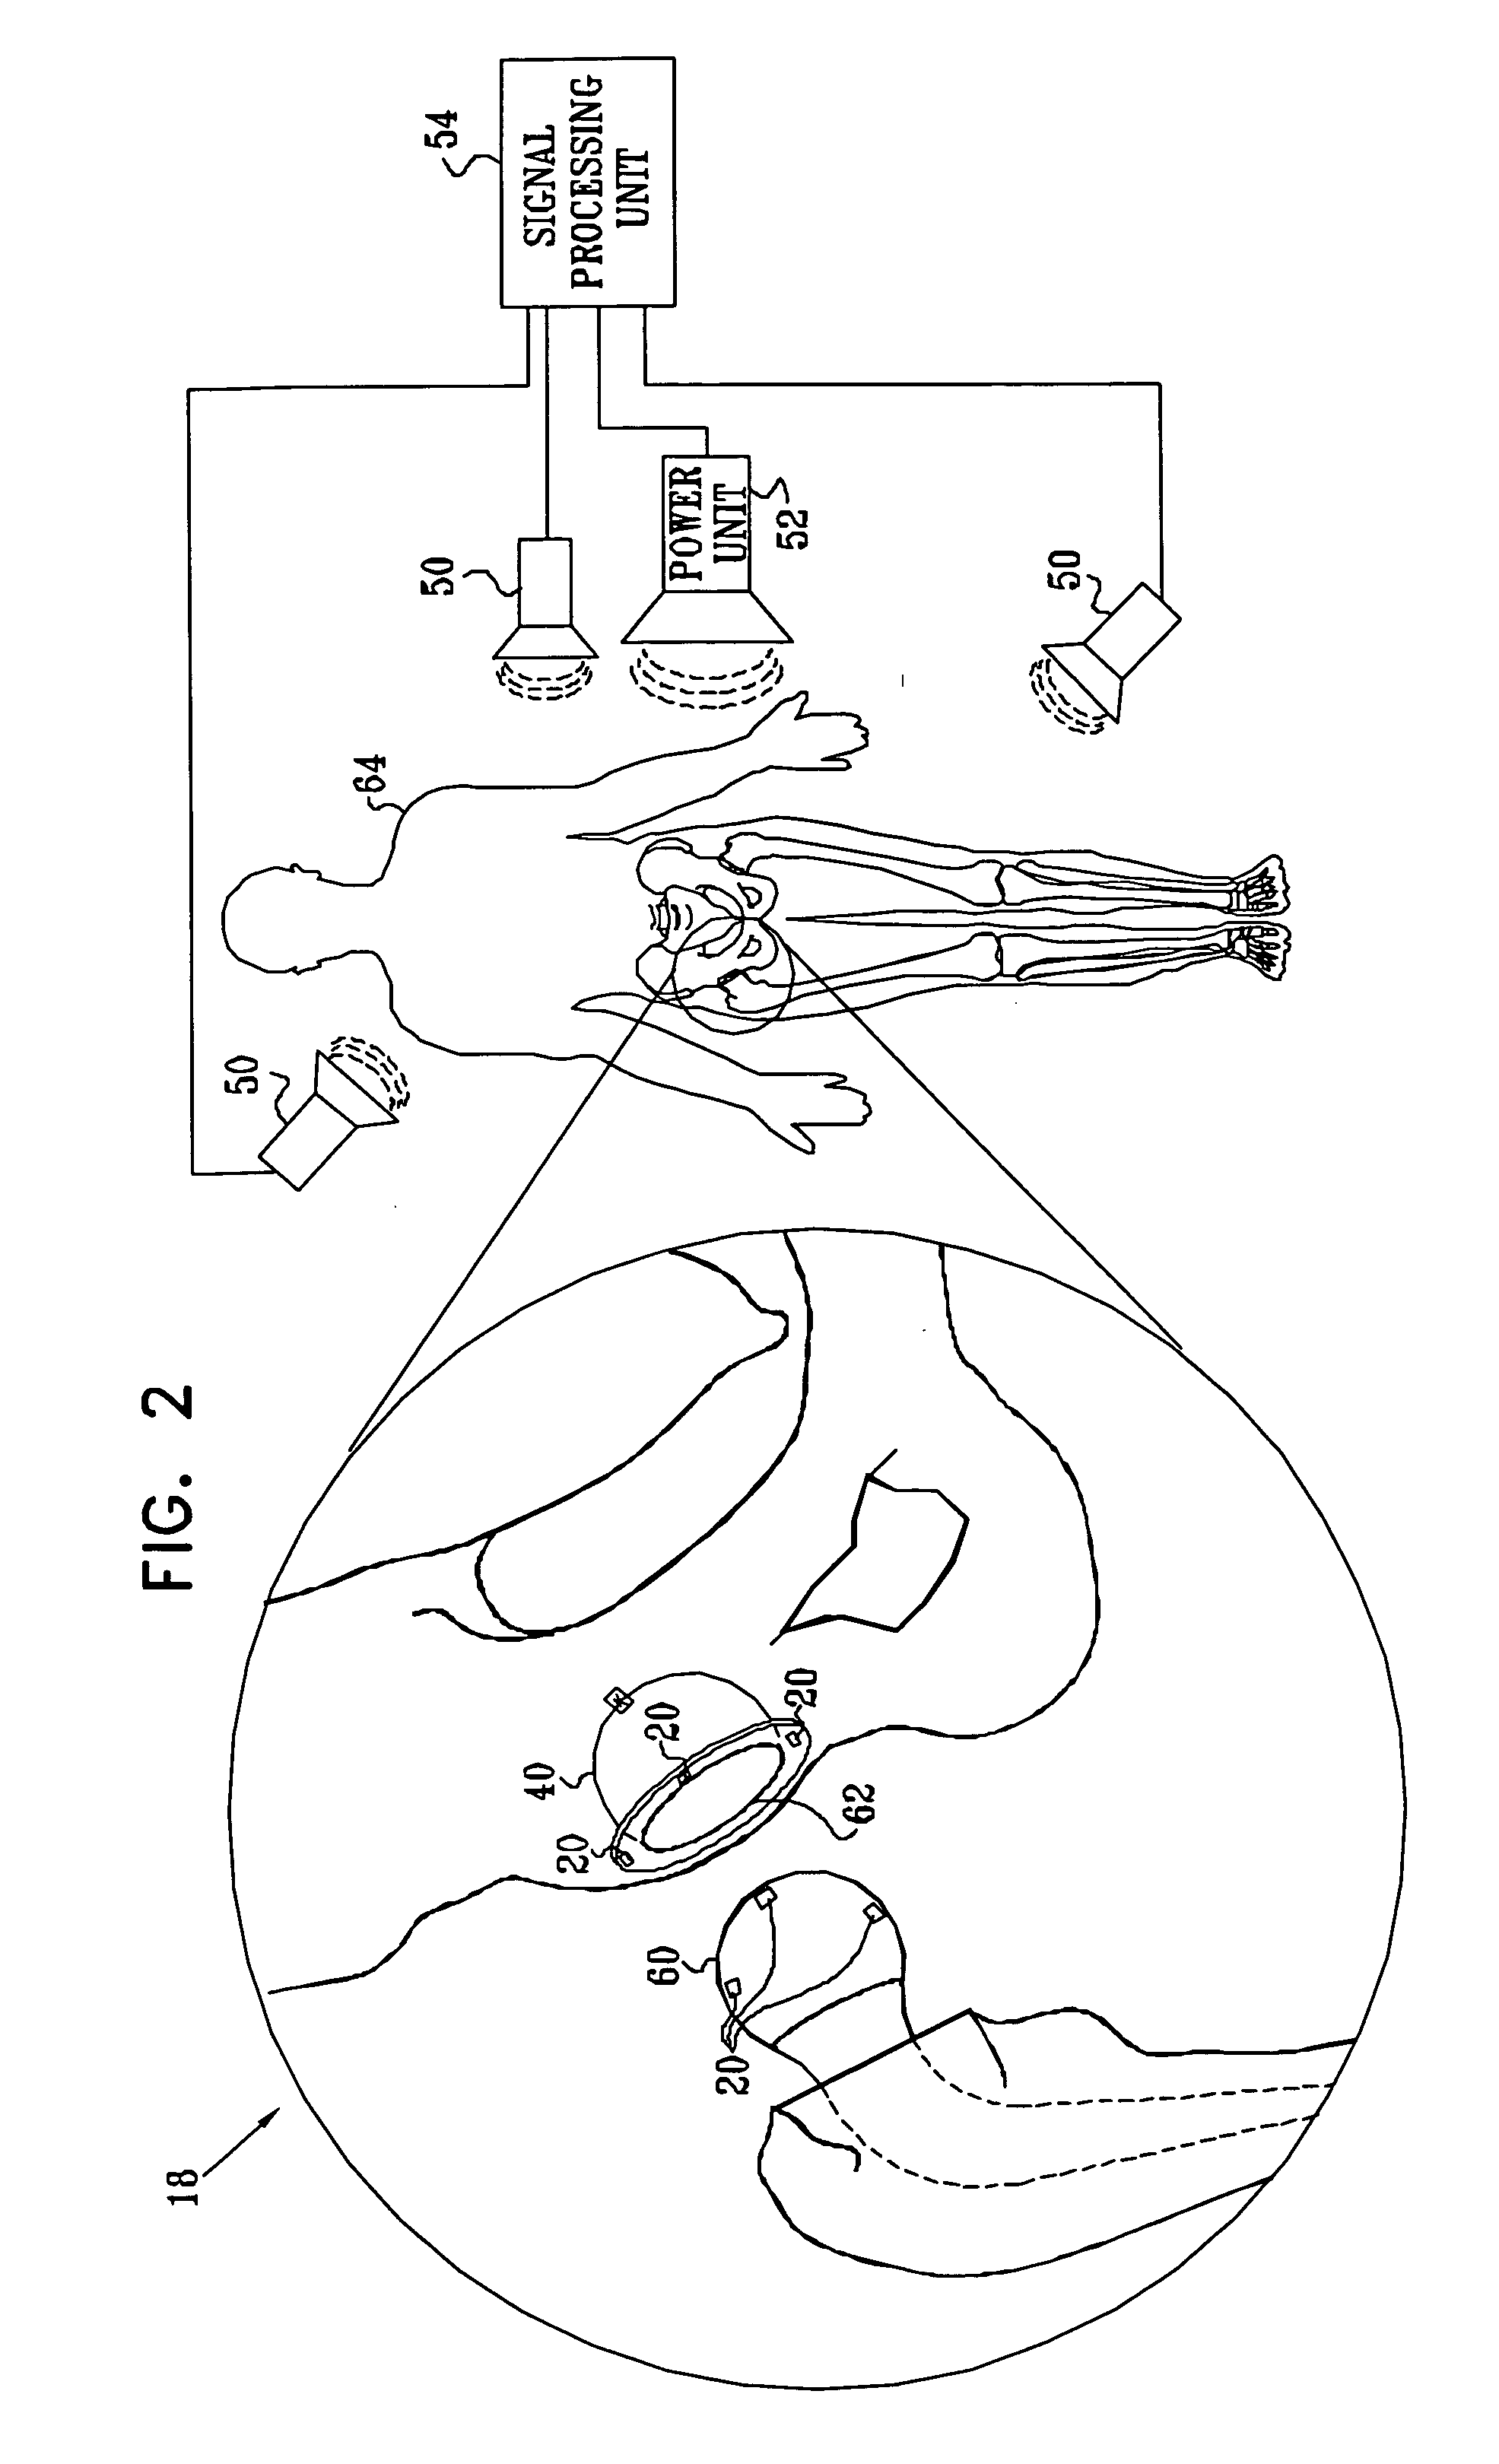 Energy transfer amplification for intrabody devices